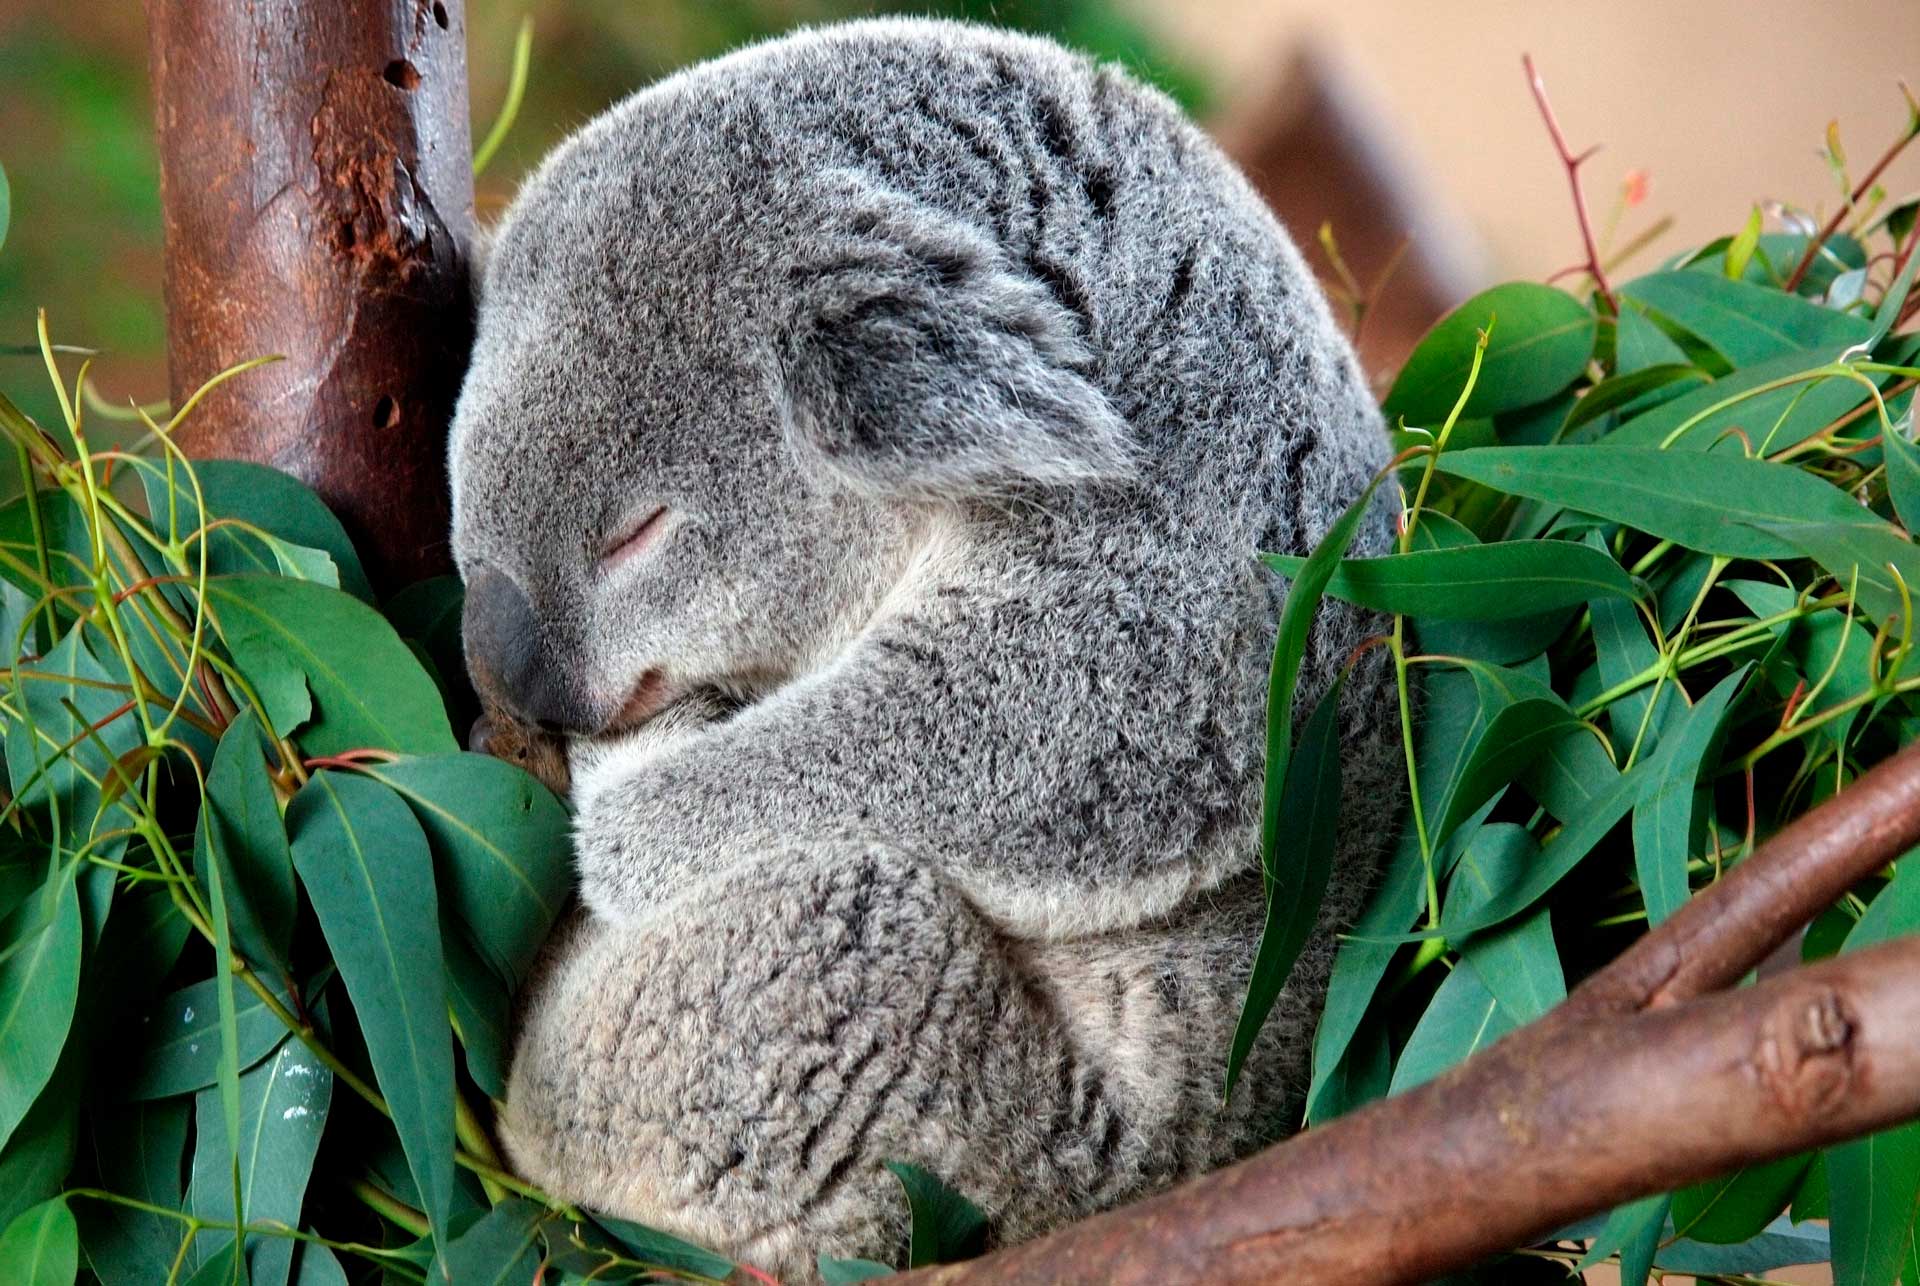 Koalas communicate with each other through noises